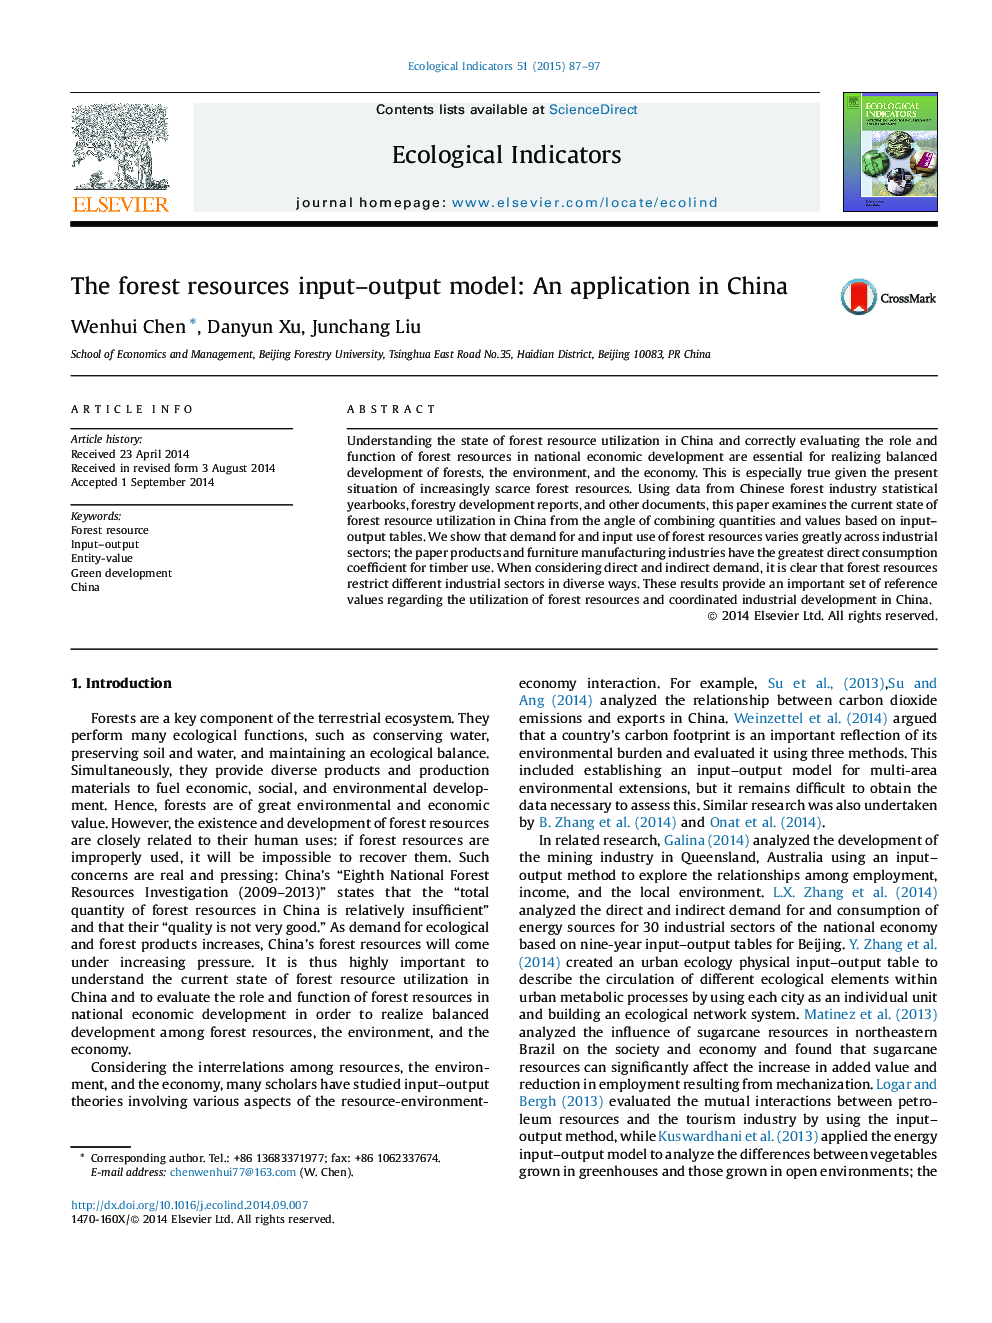 The forest resources input–output model: An application in China